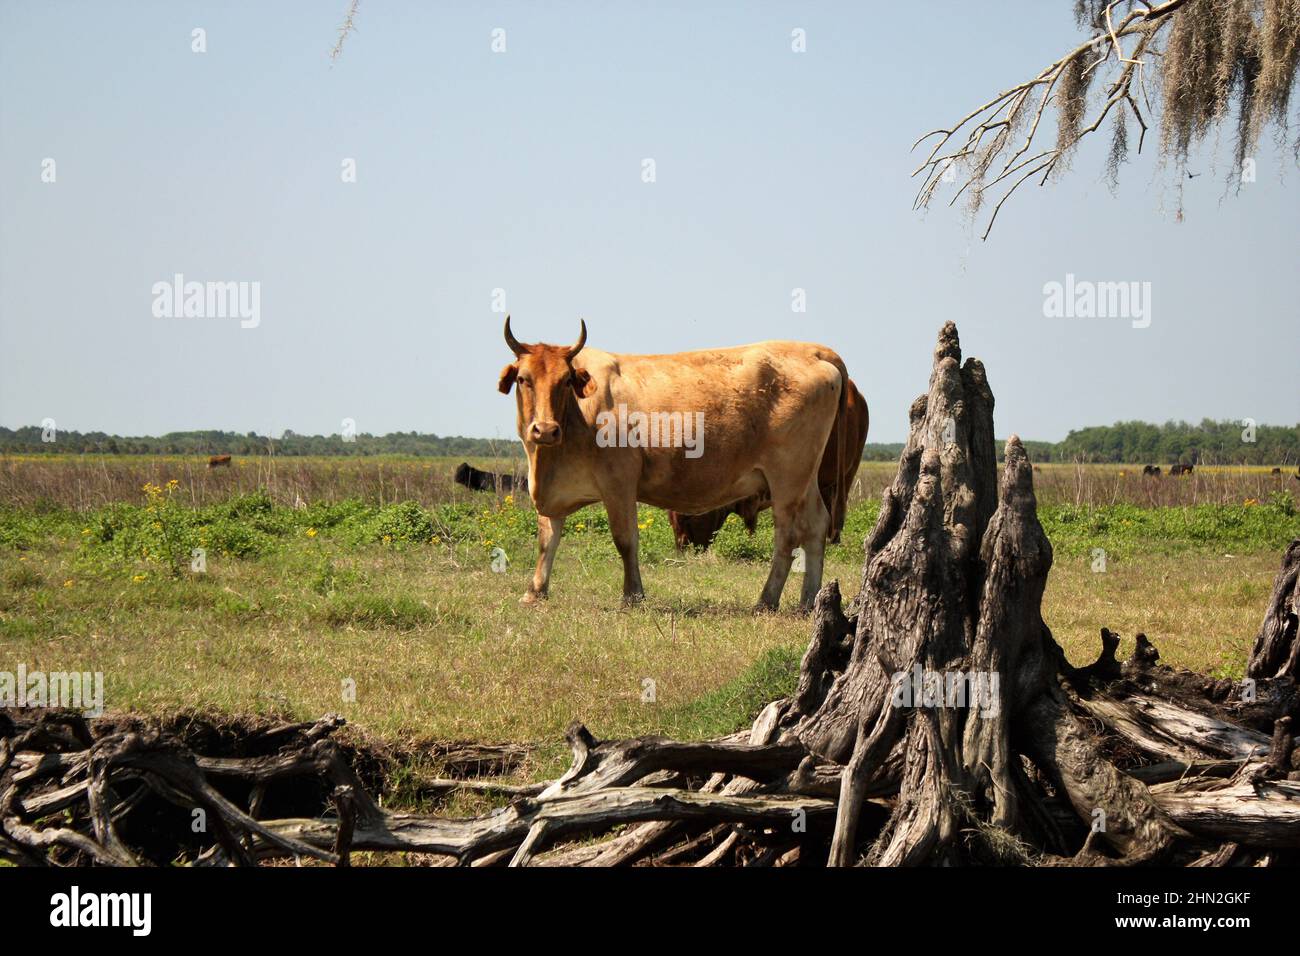 Steer waiting by Cypress trees near a Florida river Stock Photo